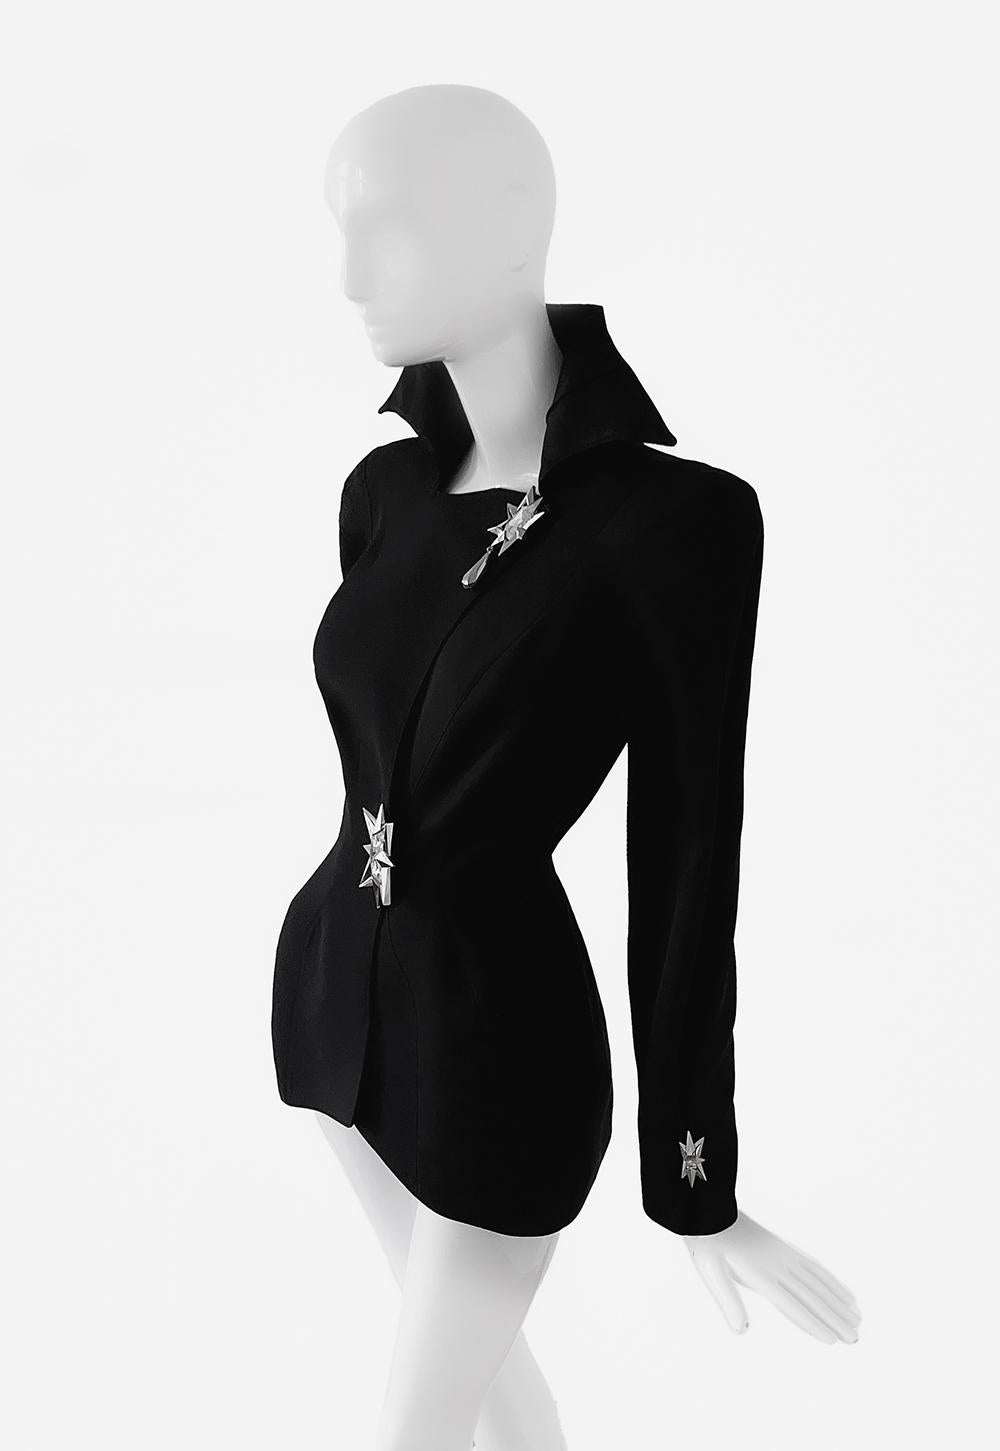 Spectacular Thierry Mugler Jacket Crystal Jewel Black Dramatic Sculptural  For Sale 1